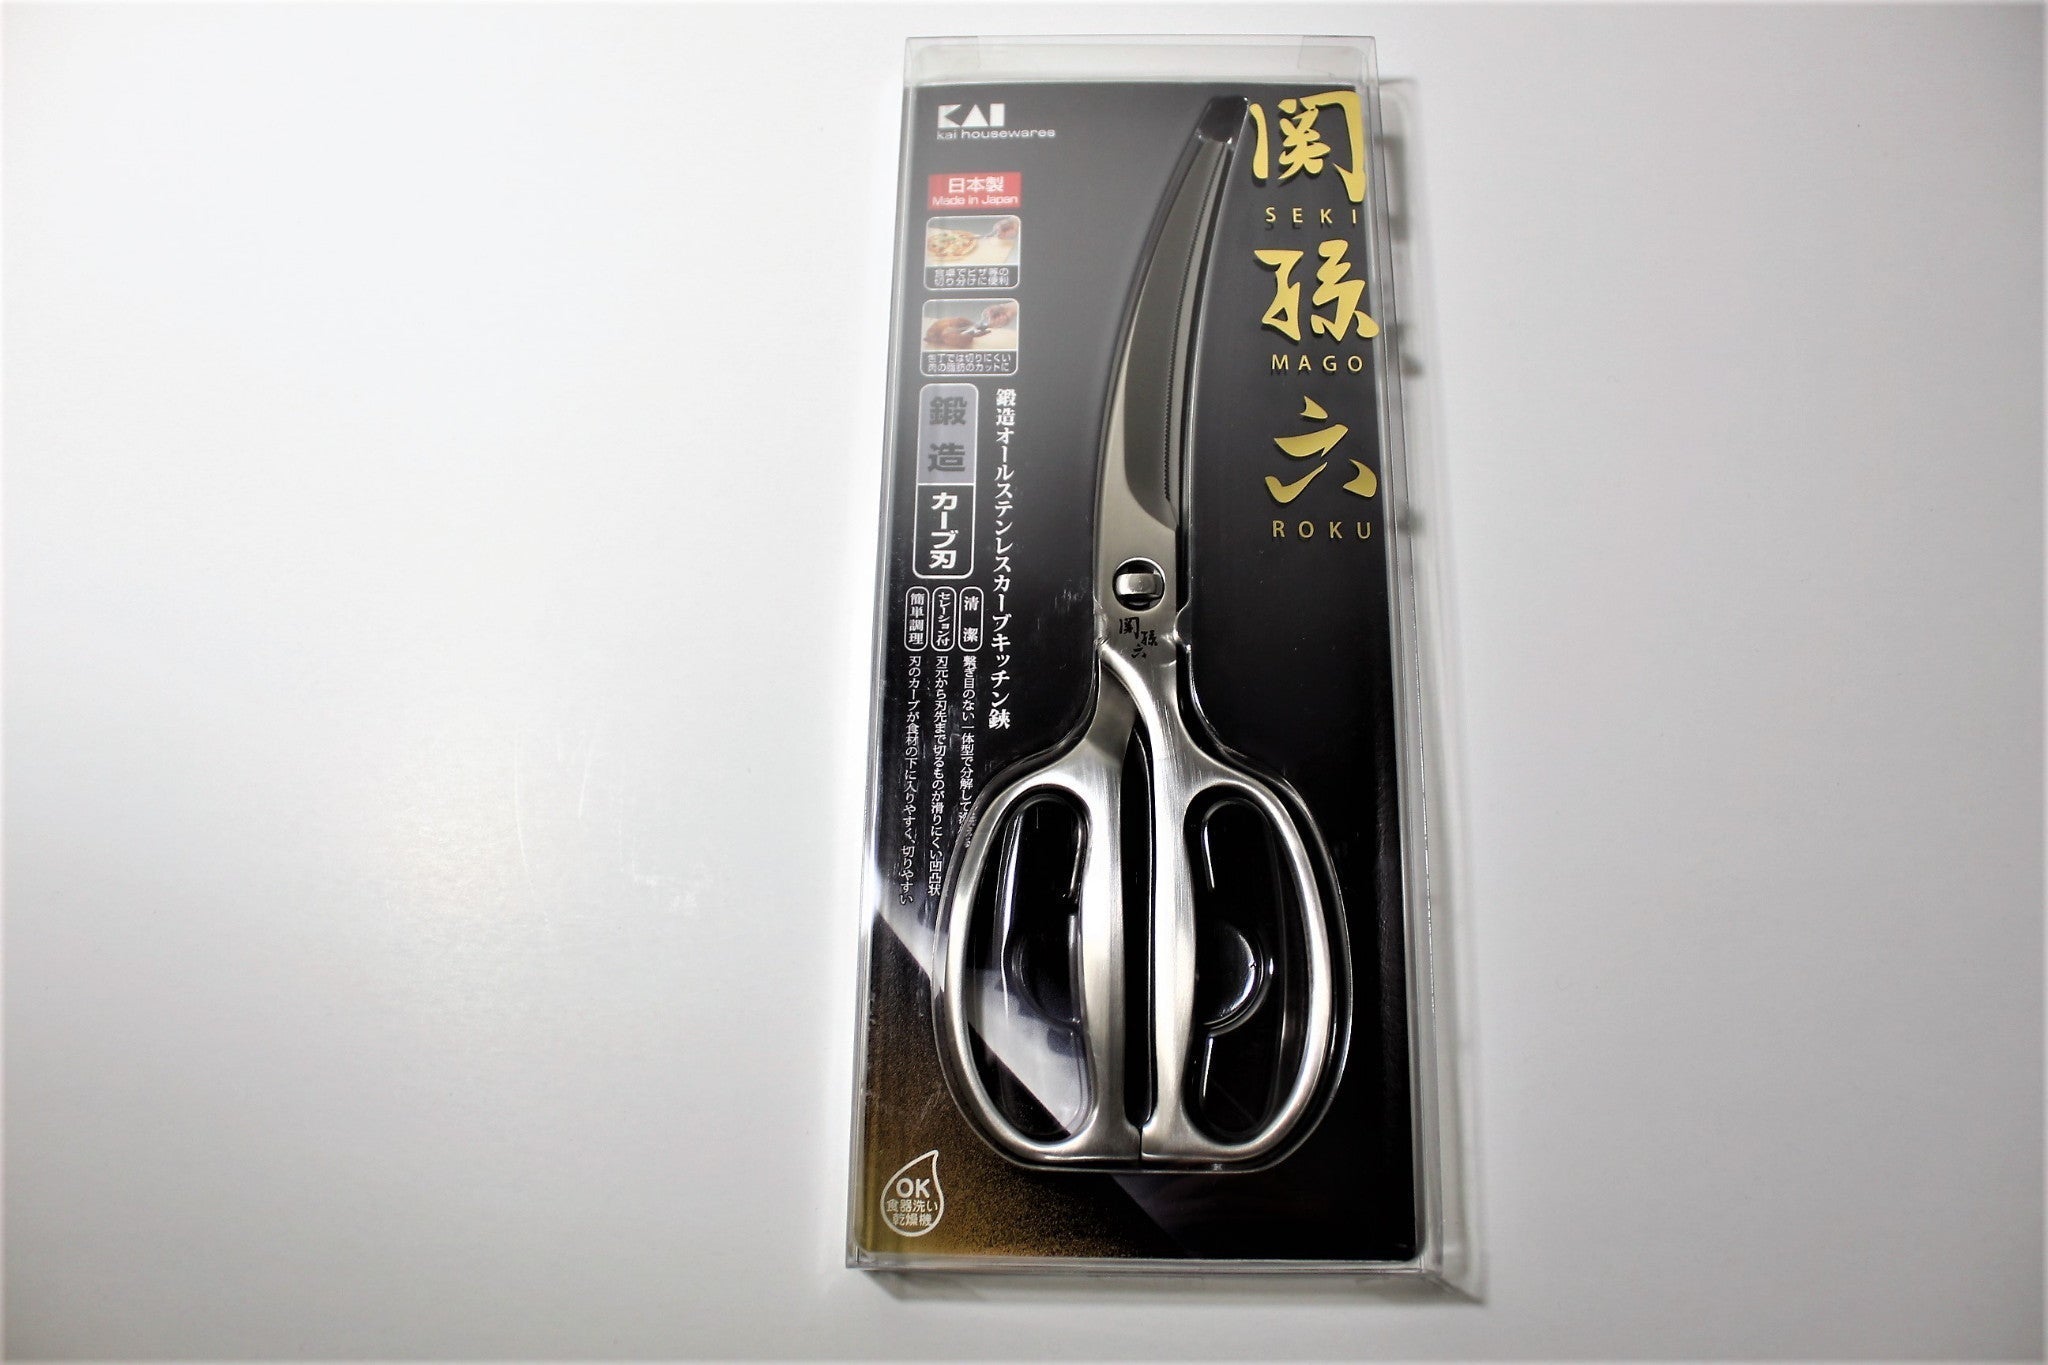  Seki Kitchen Mate Kitchen Shears - Curved Blade Scissors,  Separate Type for Clean and Washable, Made in Seki Japan : Home & Kitchen